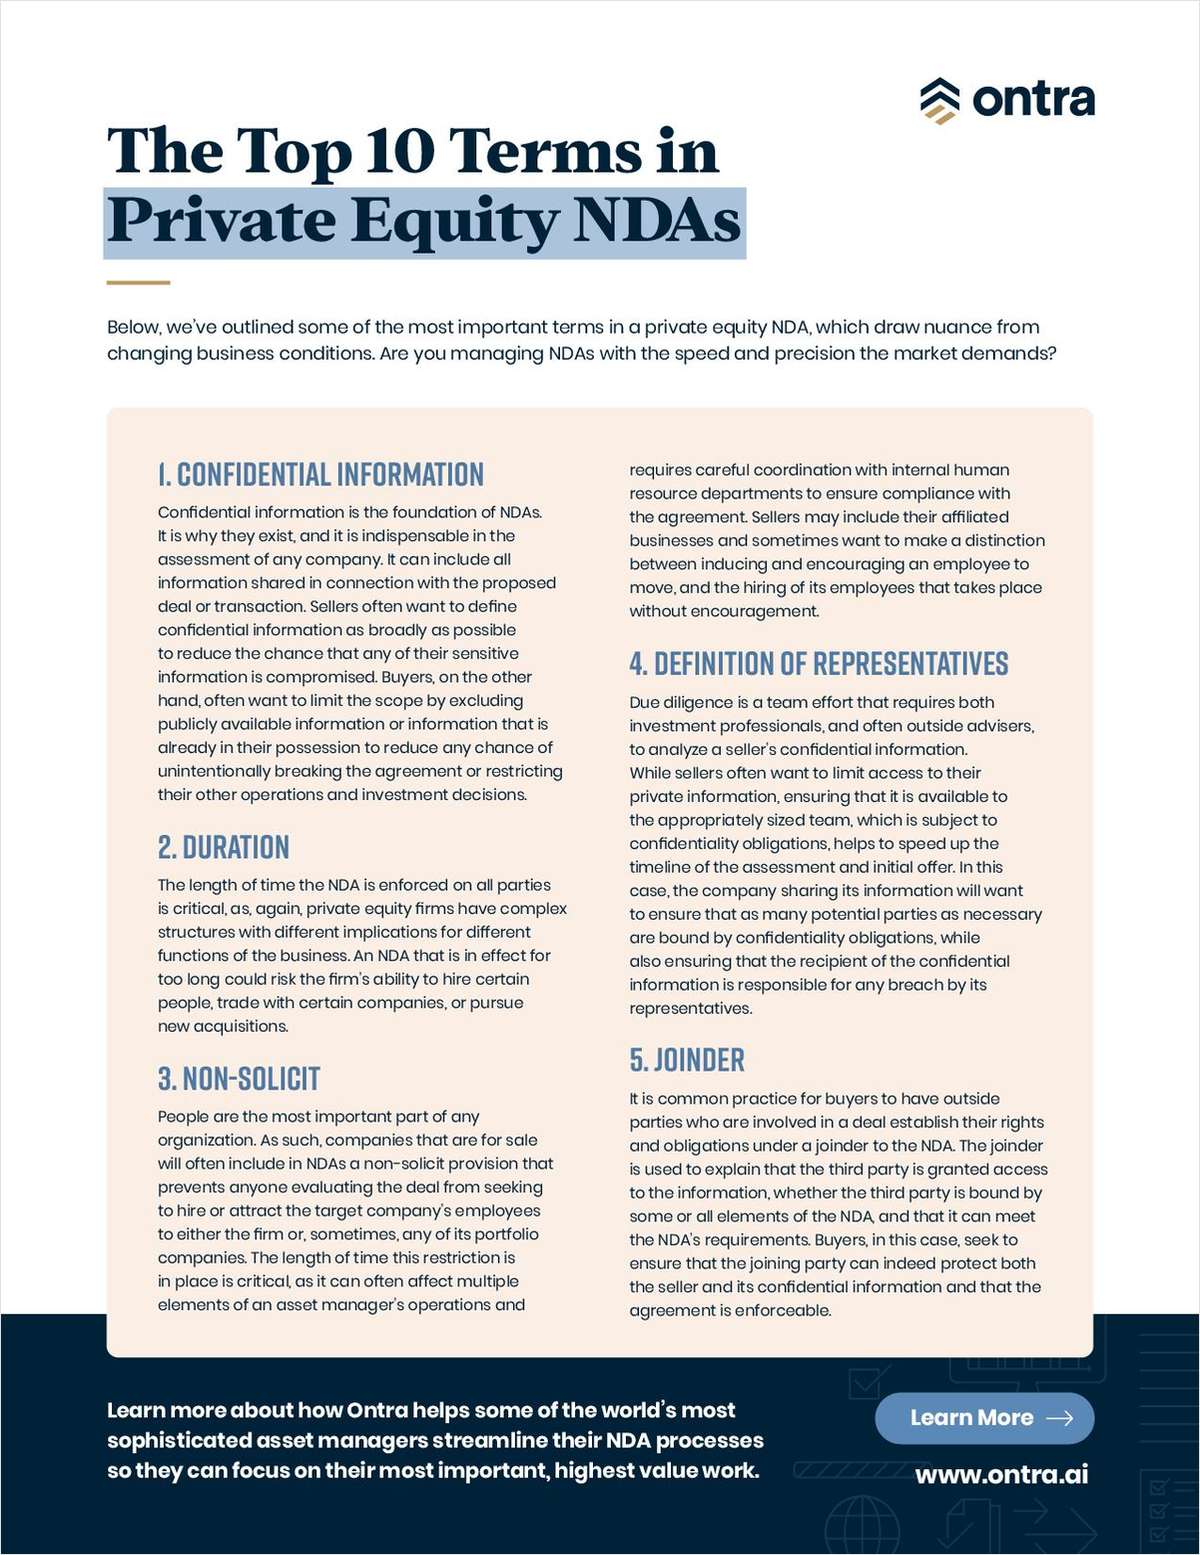 Are you managing NDAs with the speed and precision the market demands? Download this guide to learn about the most important terms in private equity NDA to help streamline your workflows.